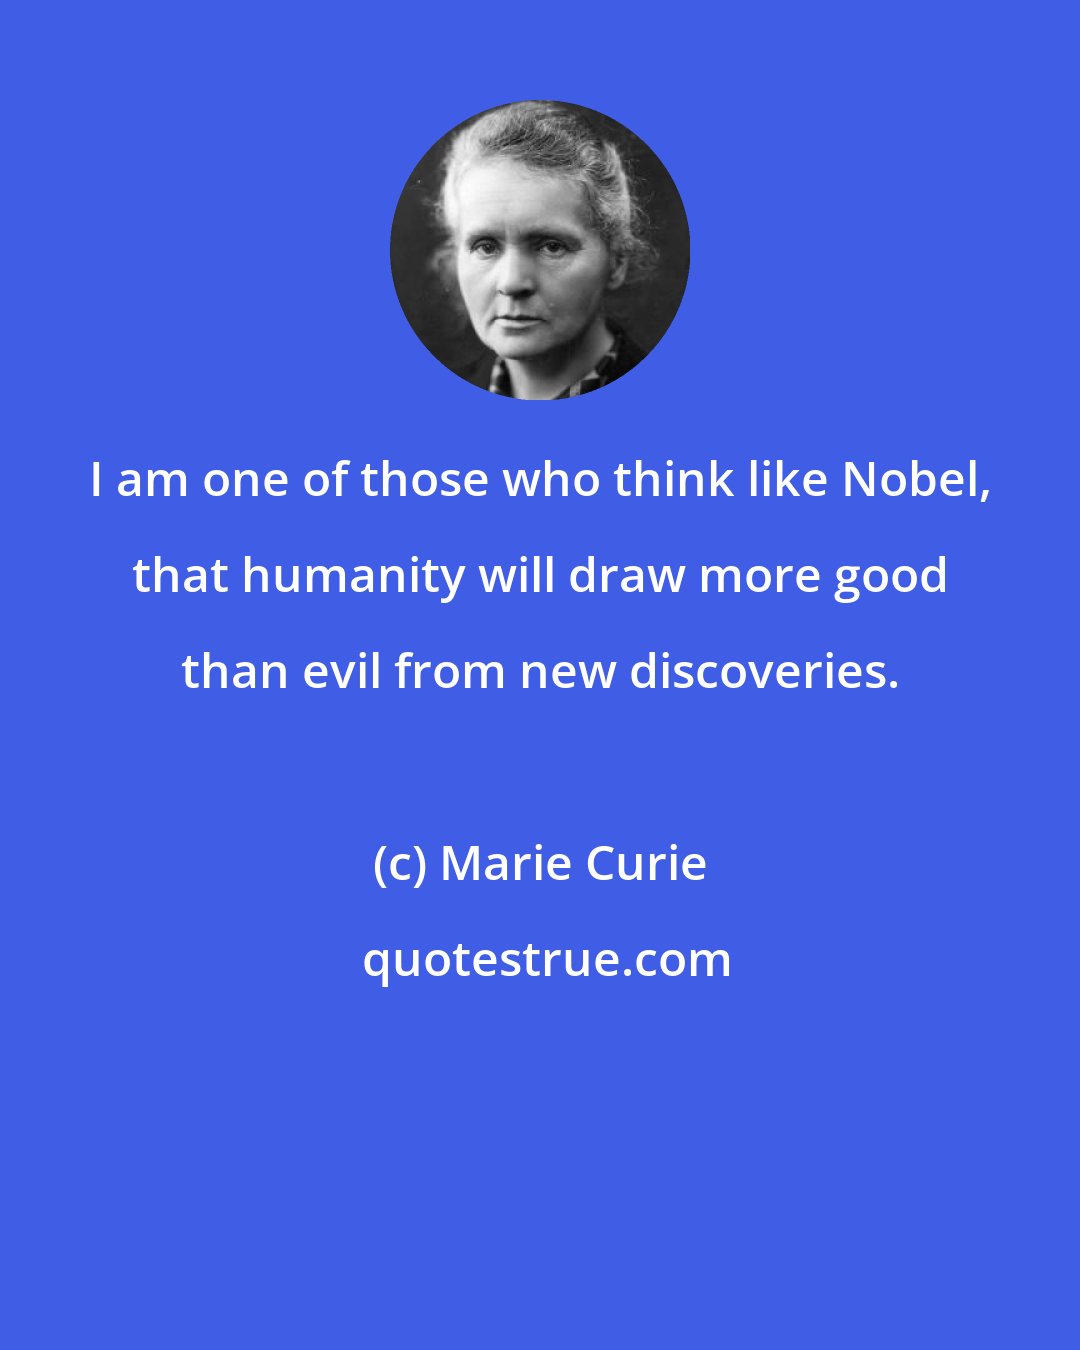 Marie Curie: I am one of those who think like Nobel, that humanity will draw more good than evil from new discoveries.